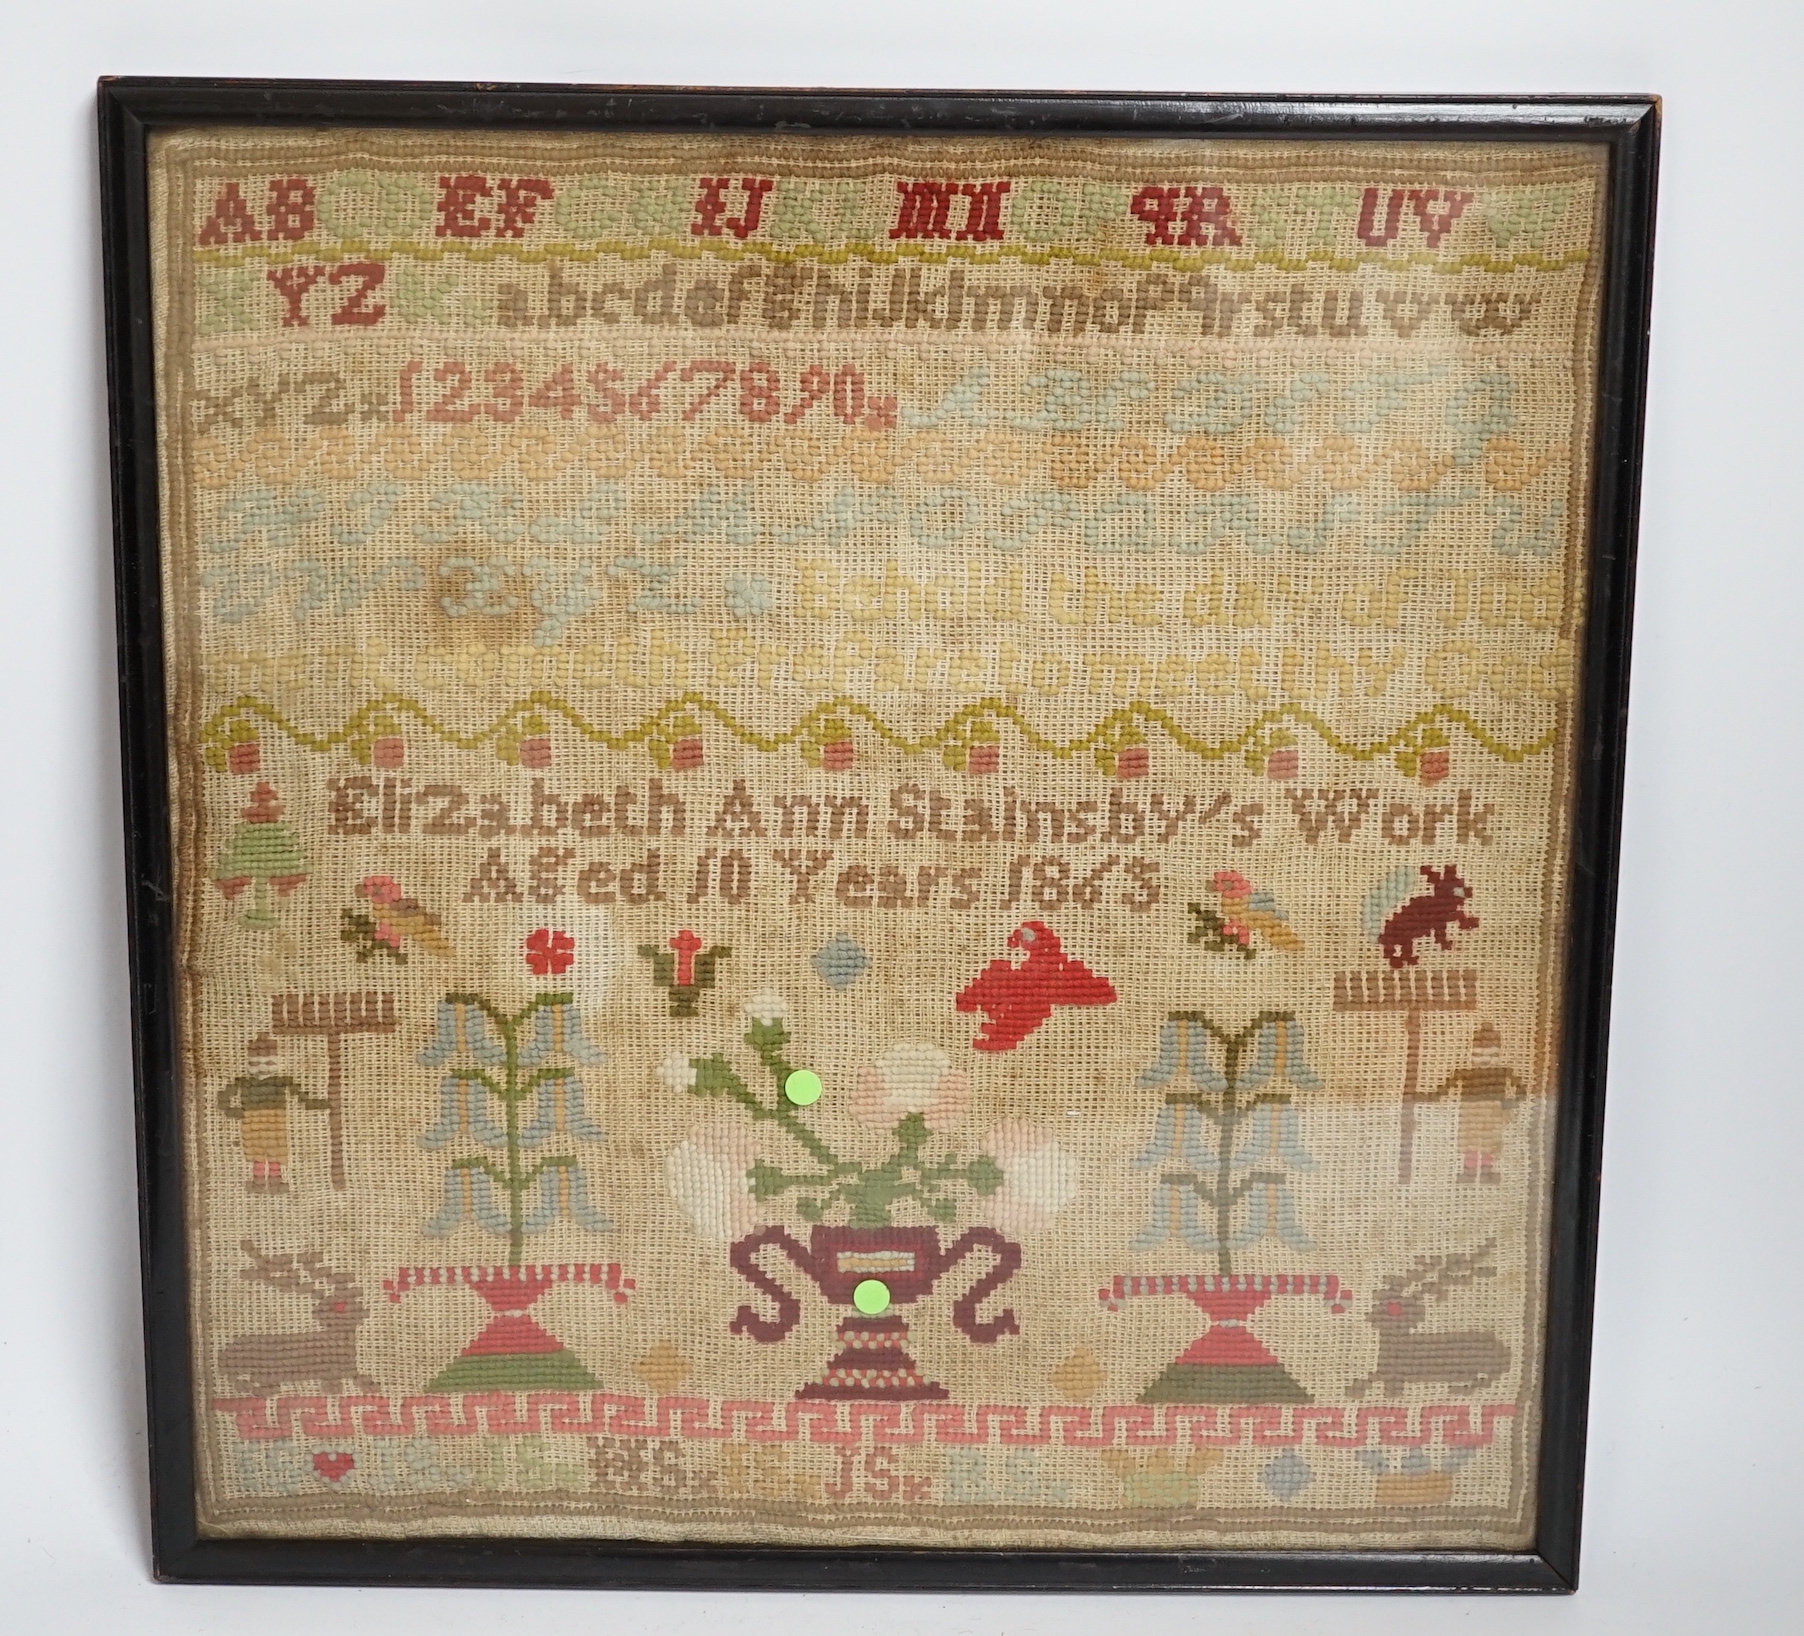 A fine cross stitch needlework sampler, by Sarah Graham, dated Oct 1842, in original frame, 36 x 30cms, and a later wool worked sampler ‘’Elizabeth Ann Stamsby’s Work Aged 10 Years 1865’’ (2)